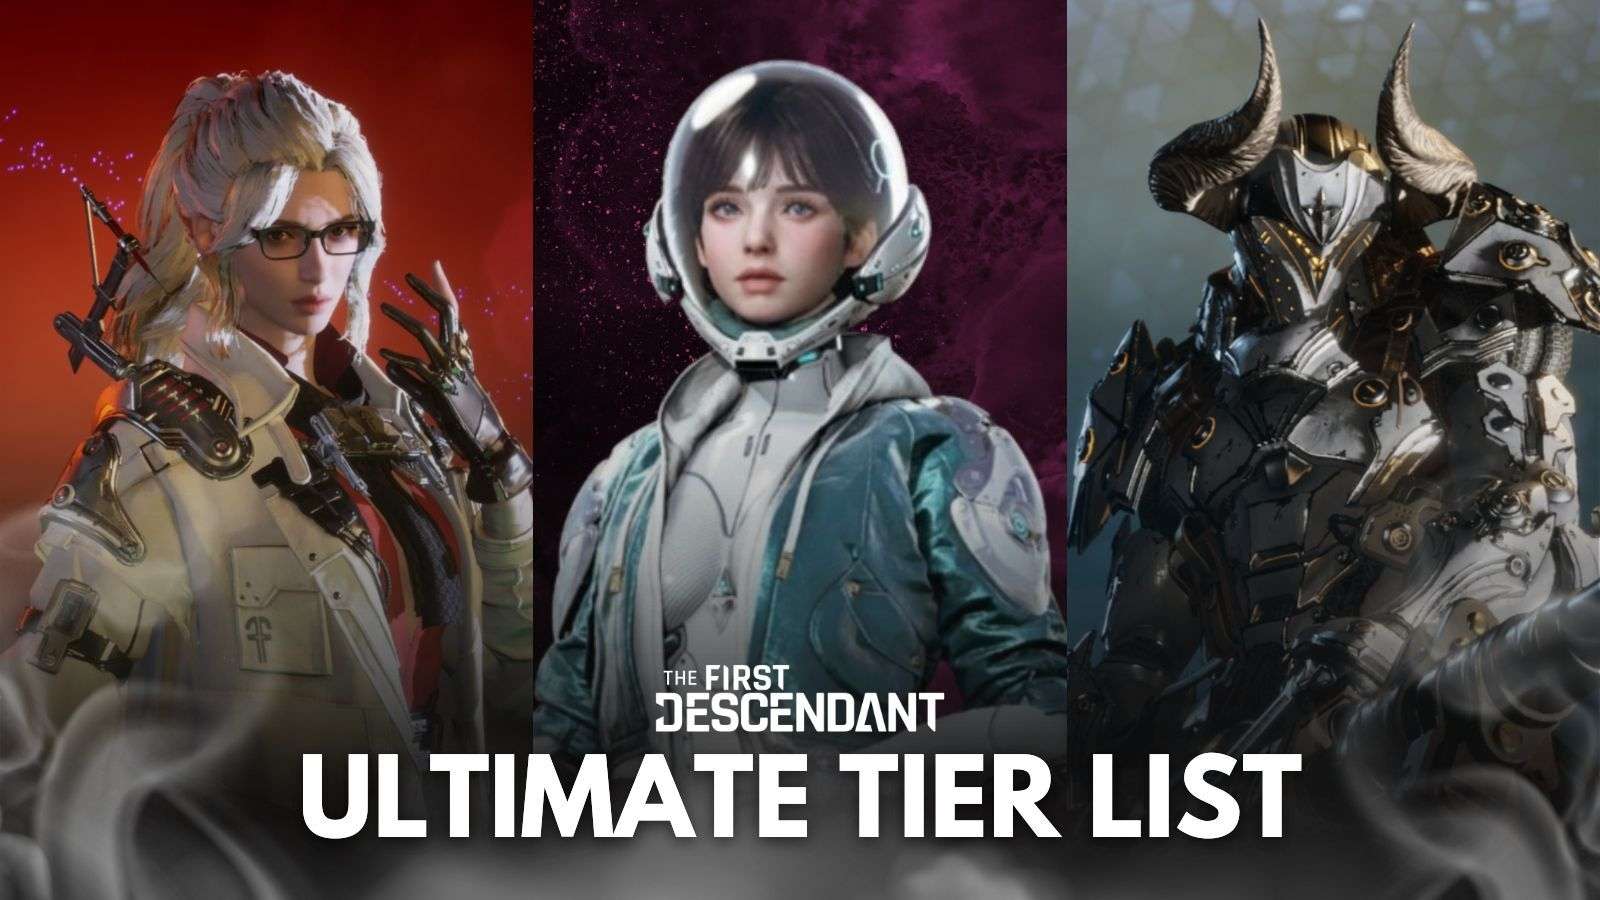 The First Descendant Character Tier List cover